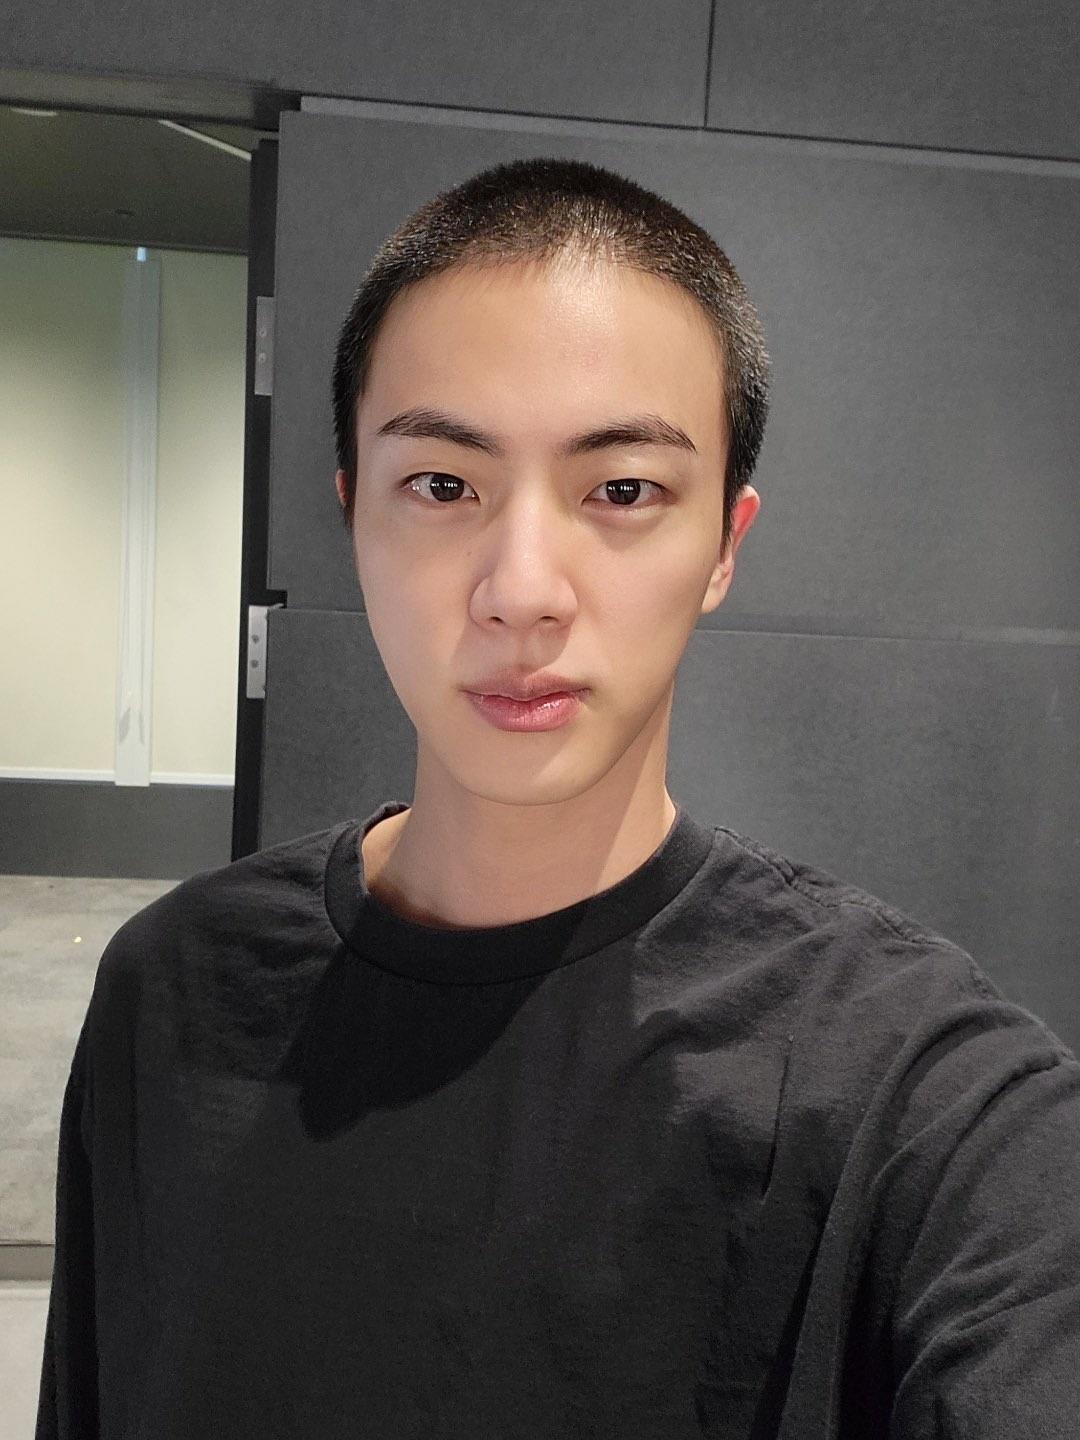 BTS’ Jin gets new buzz cut ahead of military enlistment, it’s cuter than he thought